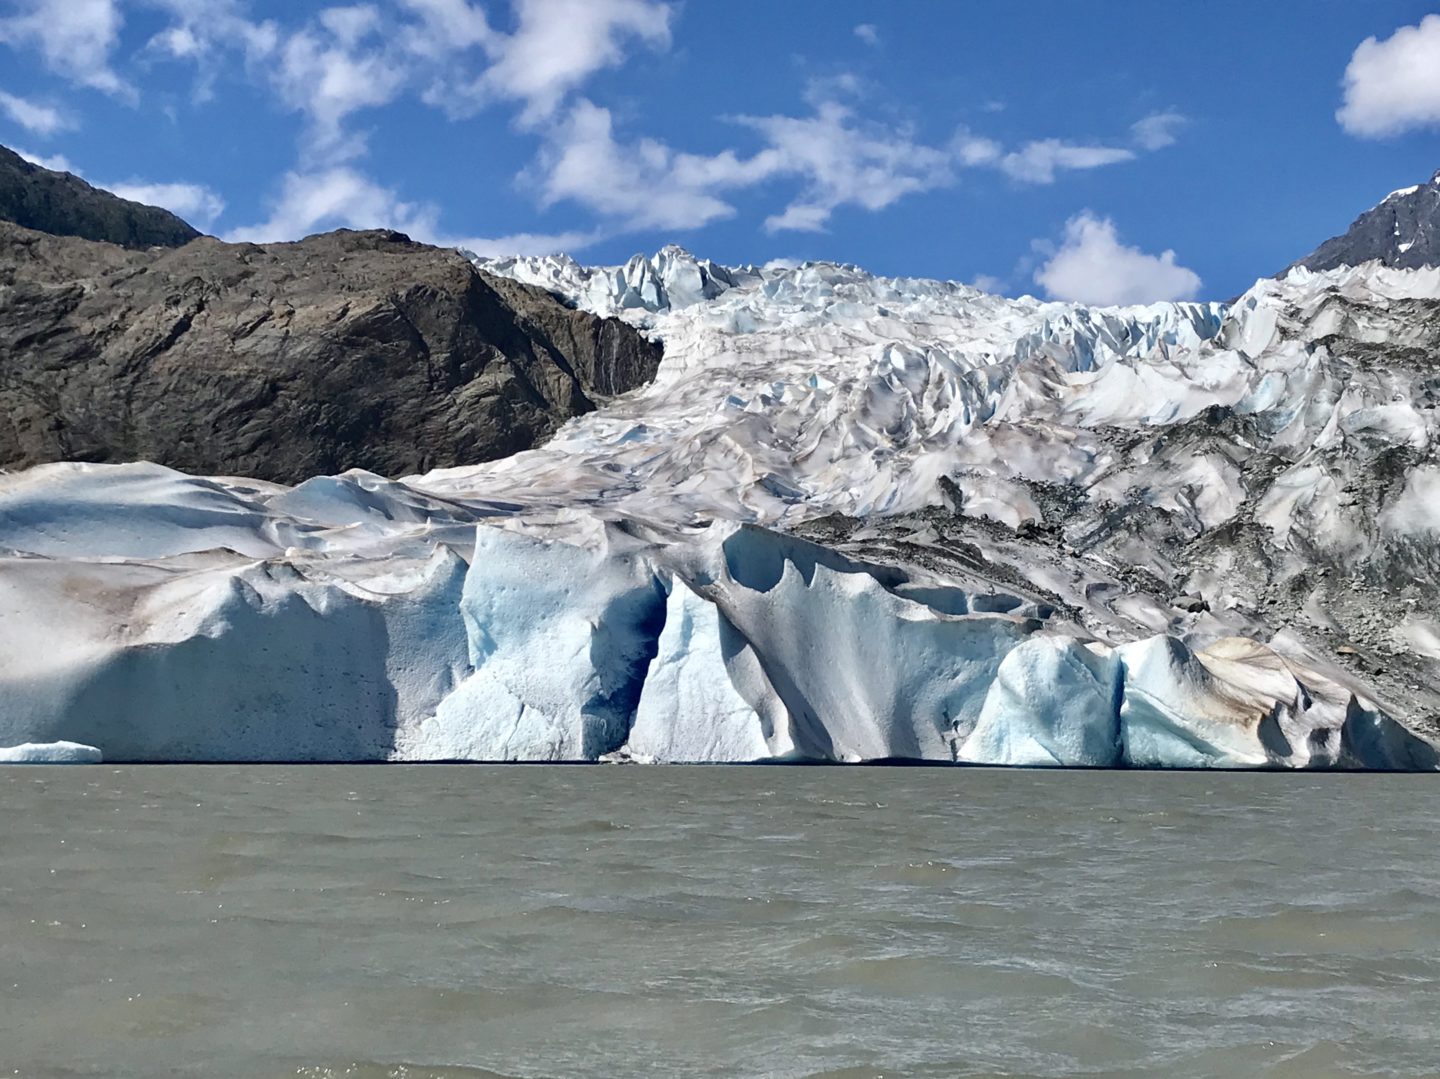 It was exciting to get closer and closer to the beautiful glacier with its blue hues. The vibrant color is caused by the tightly compacted snow, which becomes ice and absorbs all colors of the spectrum except blue. 